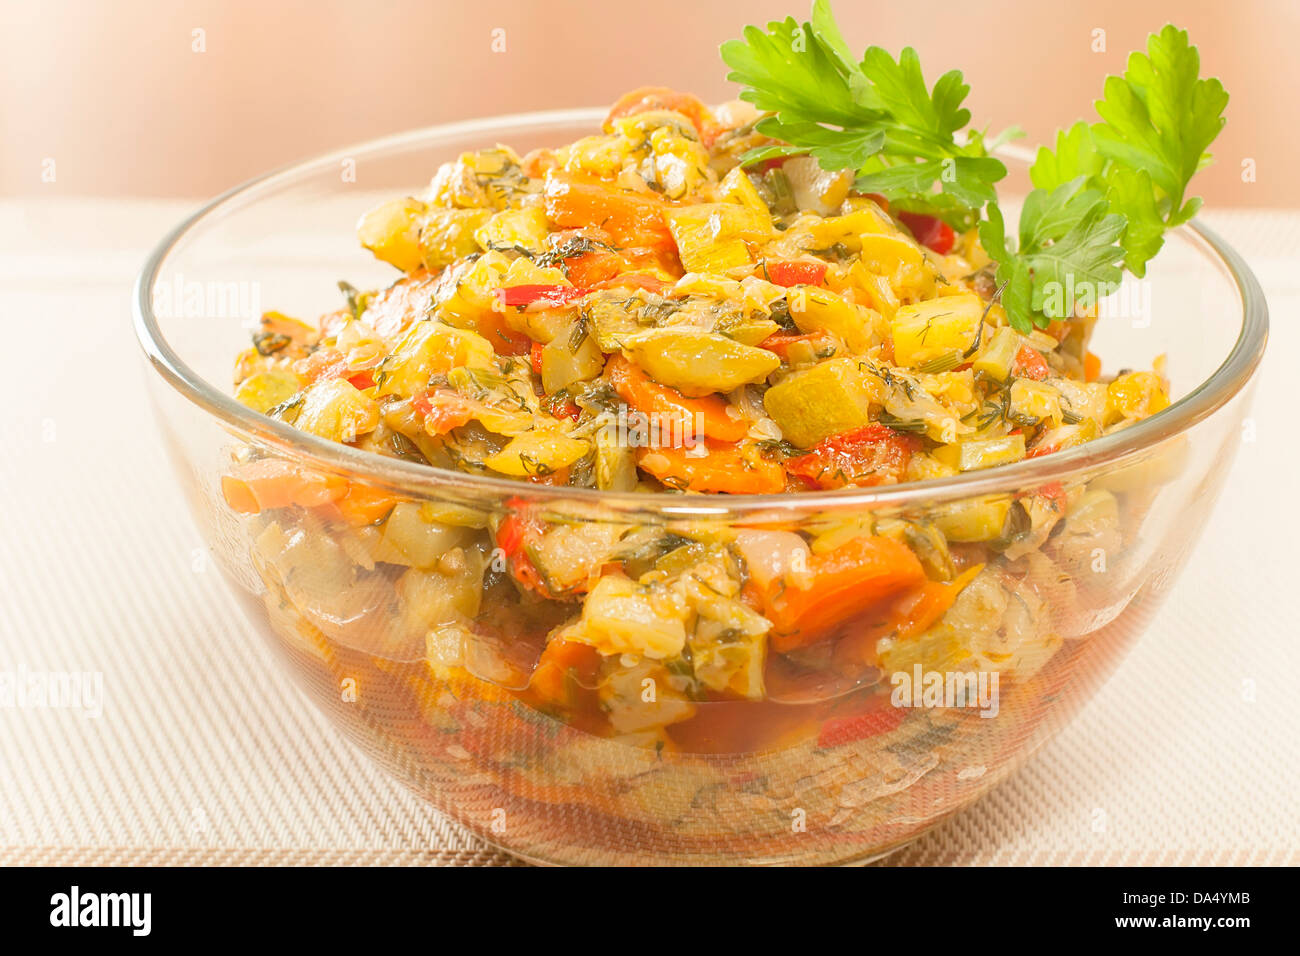 finished saute courgettes in a glass bowl closeup Stock Photo